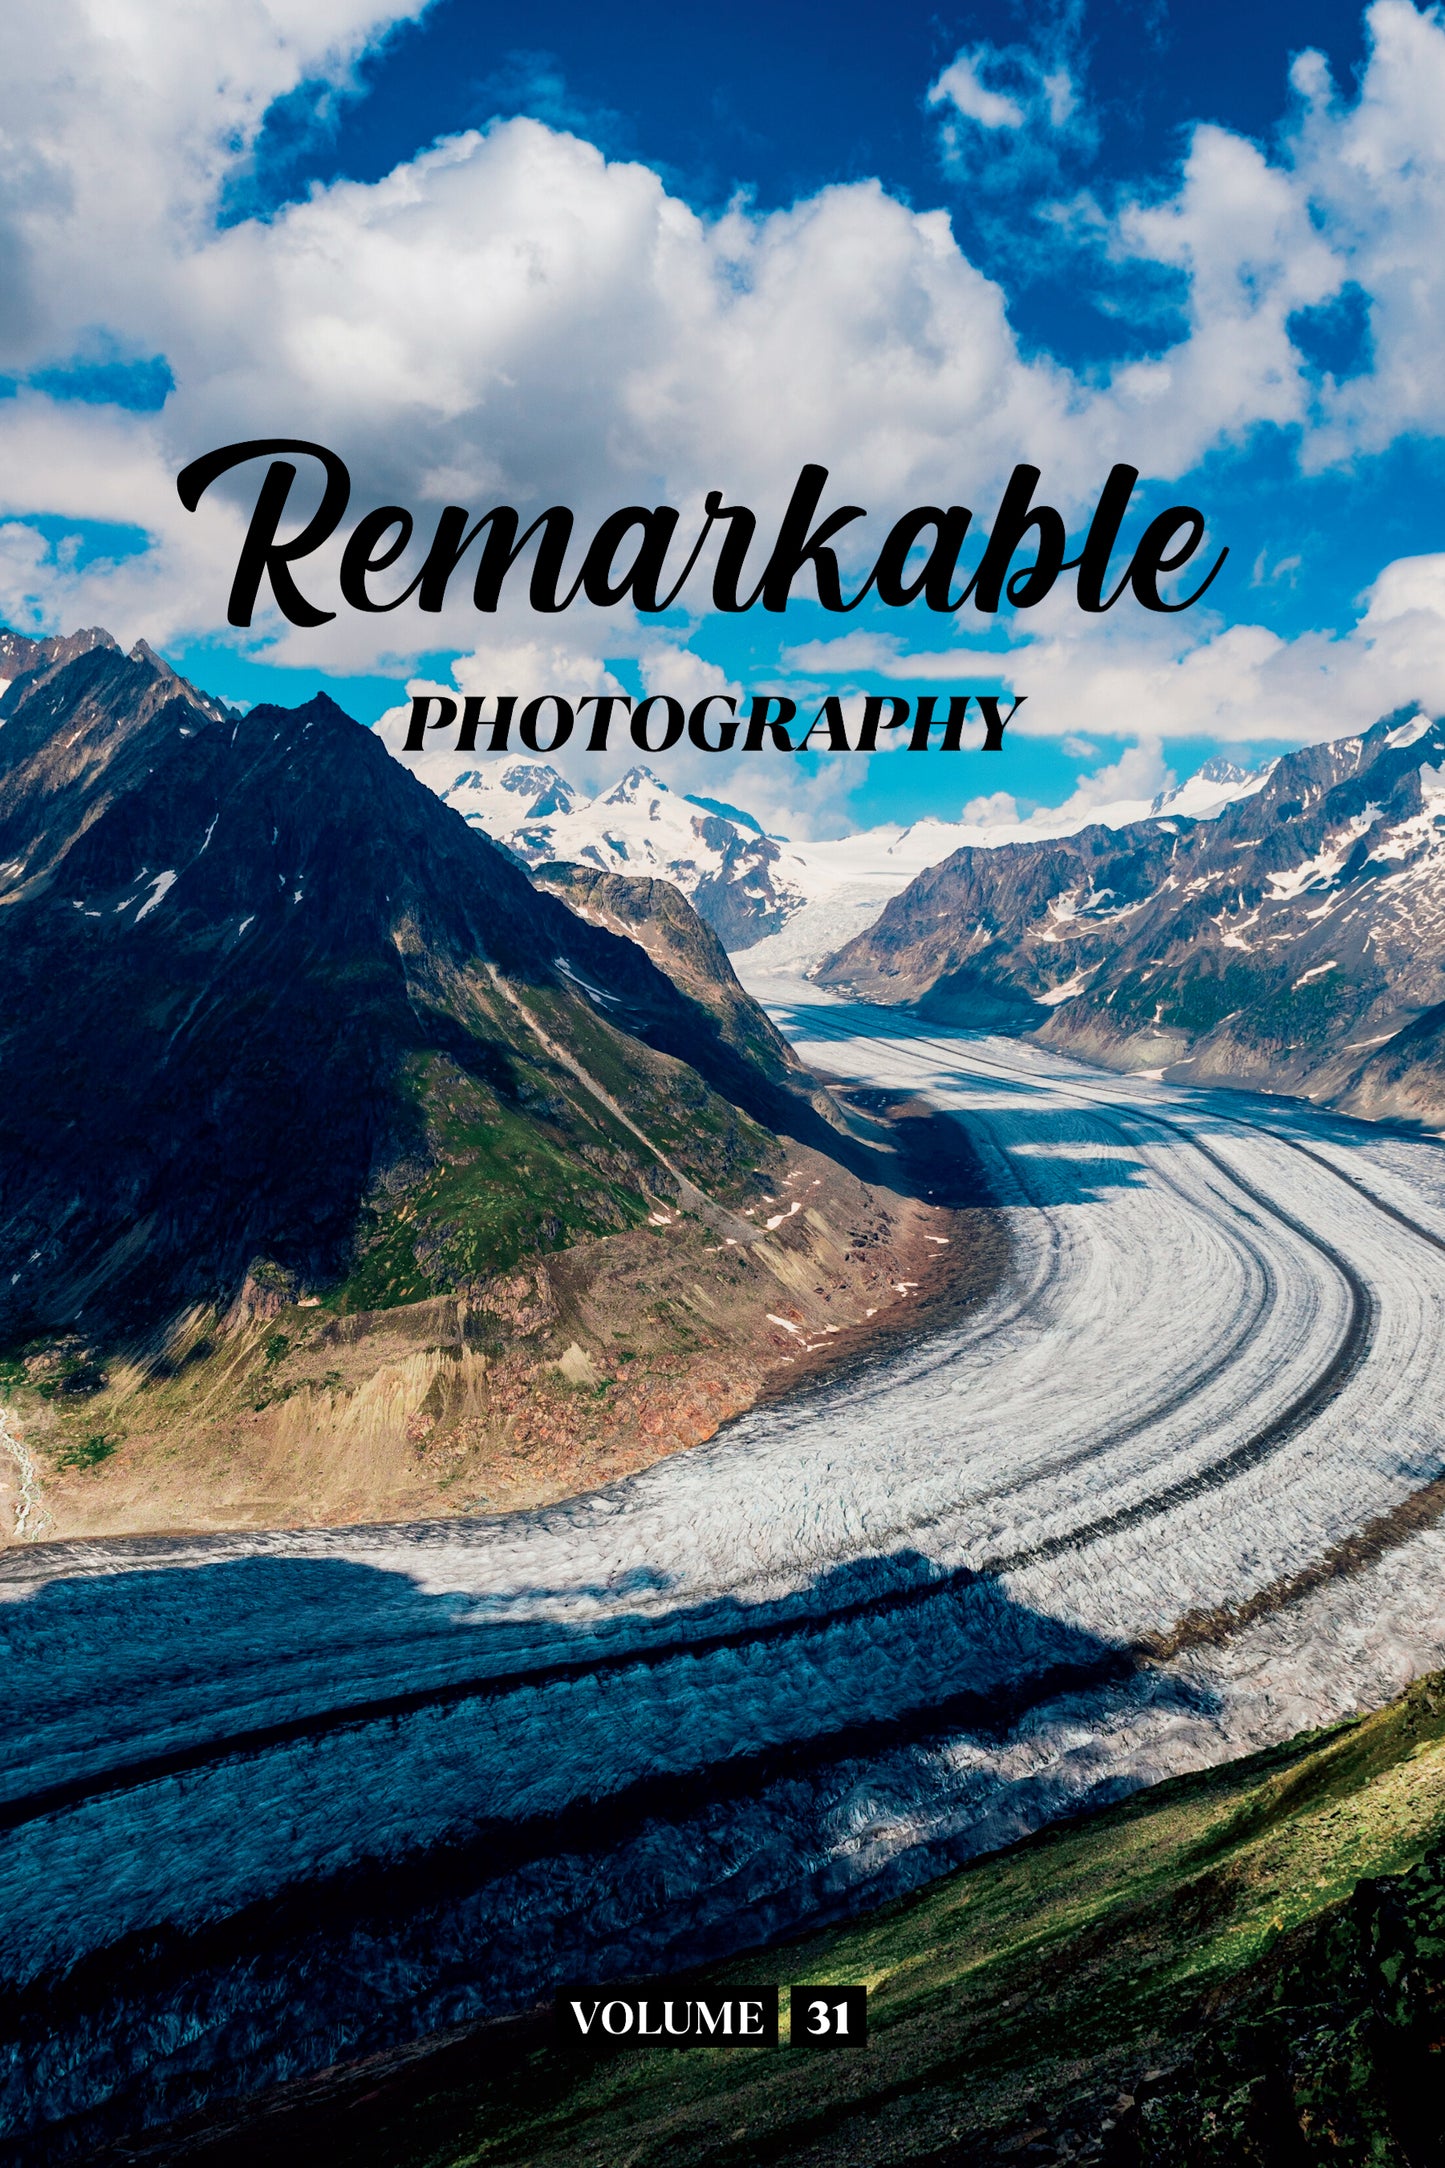 Remarkable Photography Volume 31 (Physical Book Pre-Order)